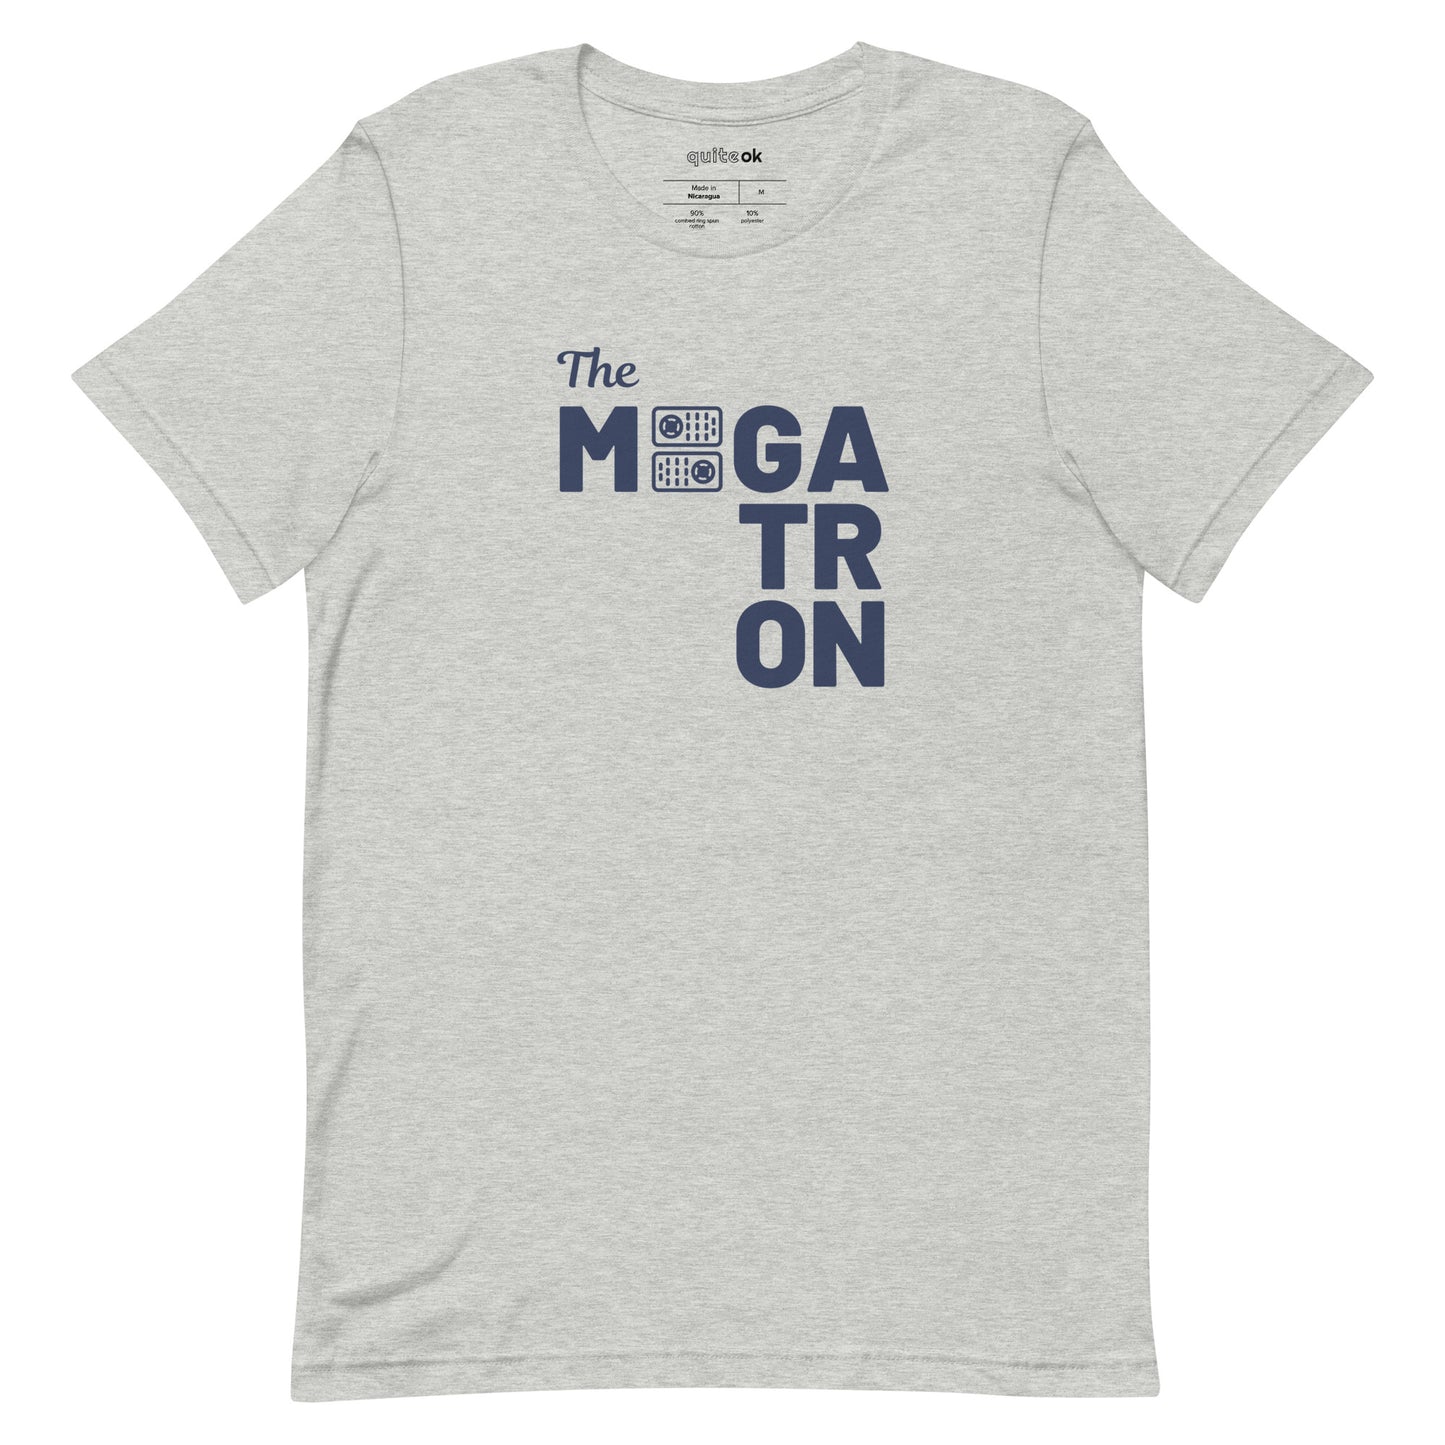 The Megatron Comedy Quote T-Shirt